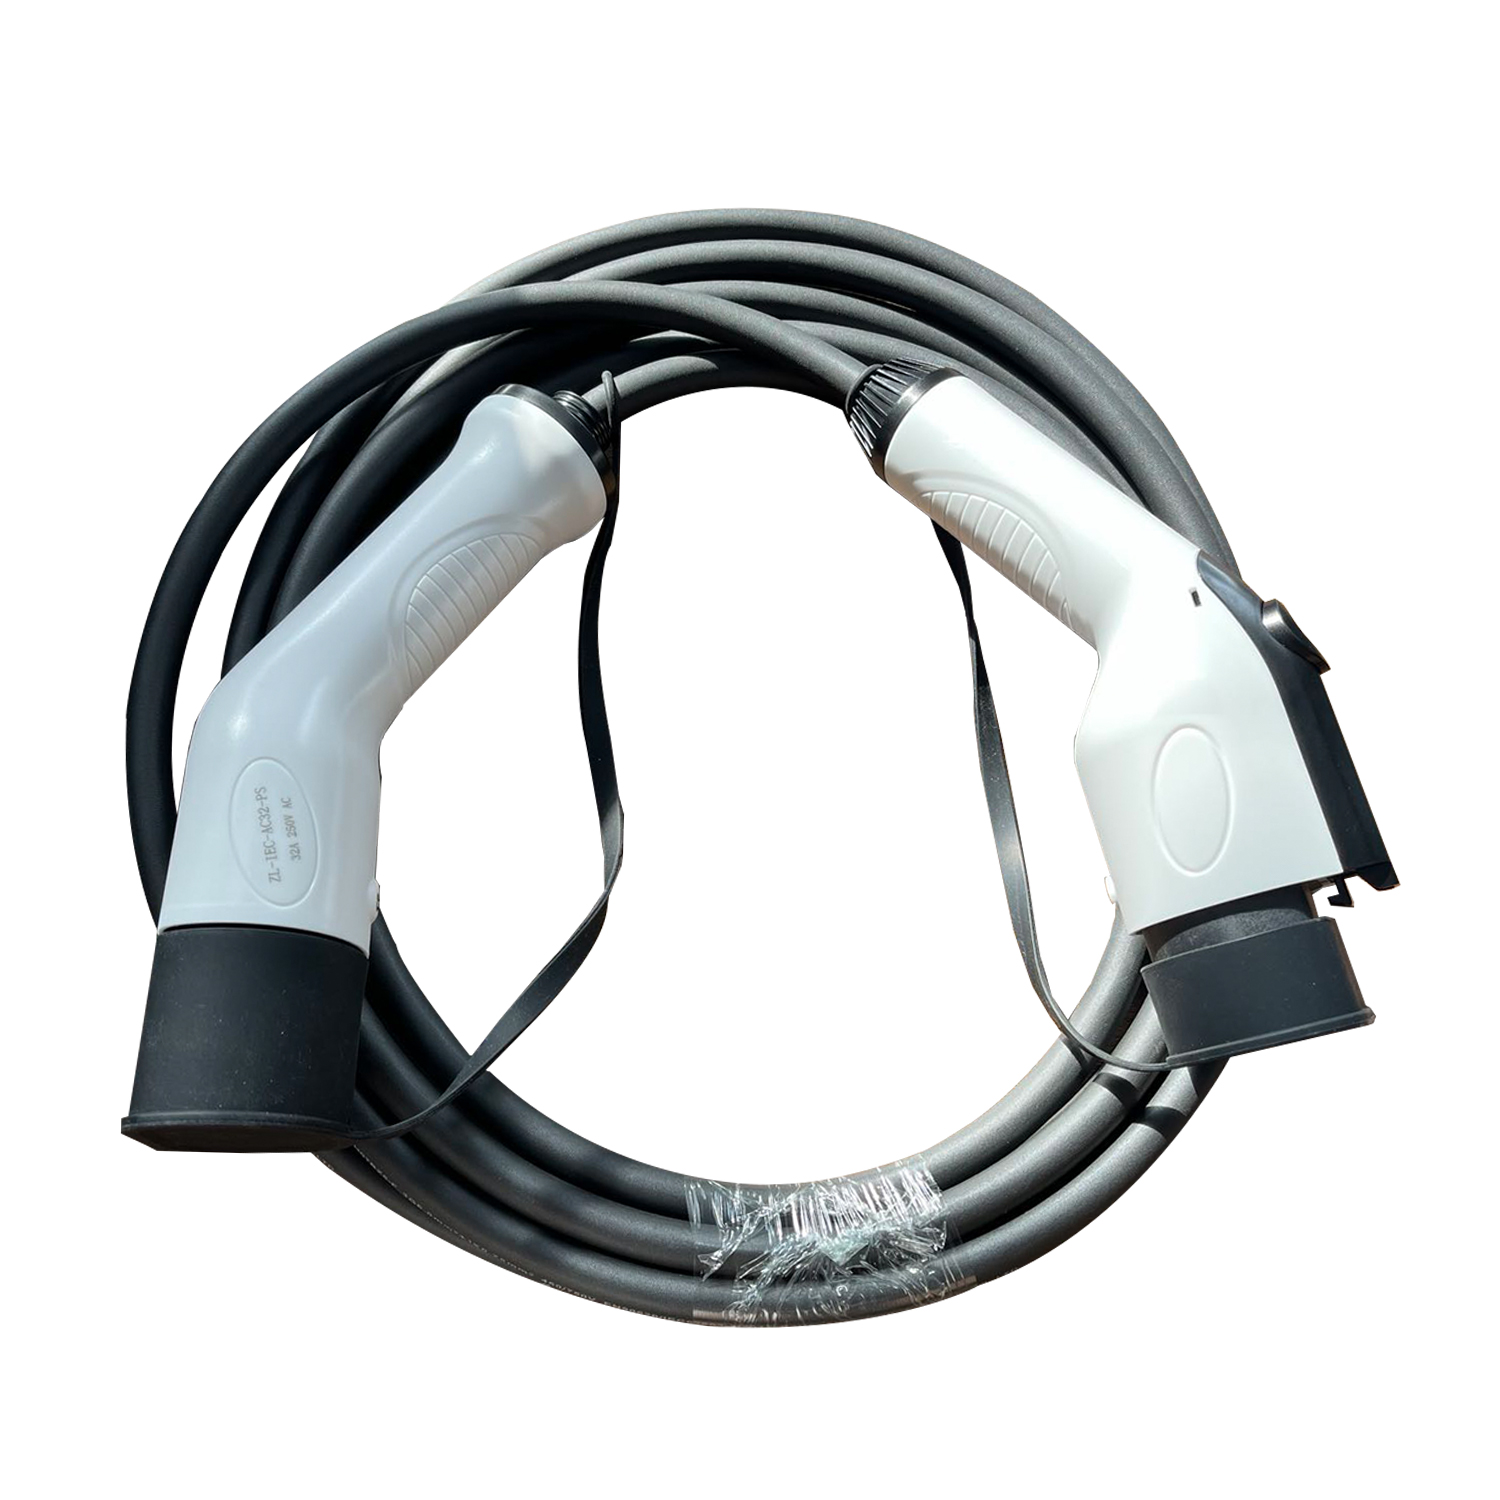 32A Type 2 To GB/T EV Charging Cable with 5m 